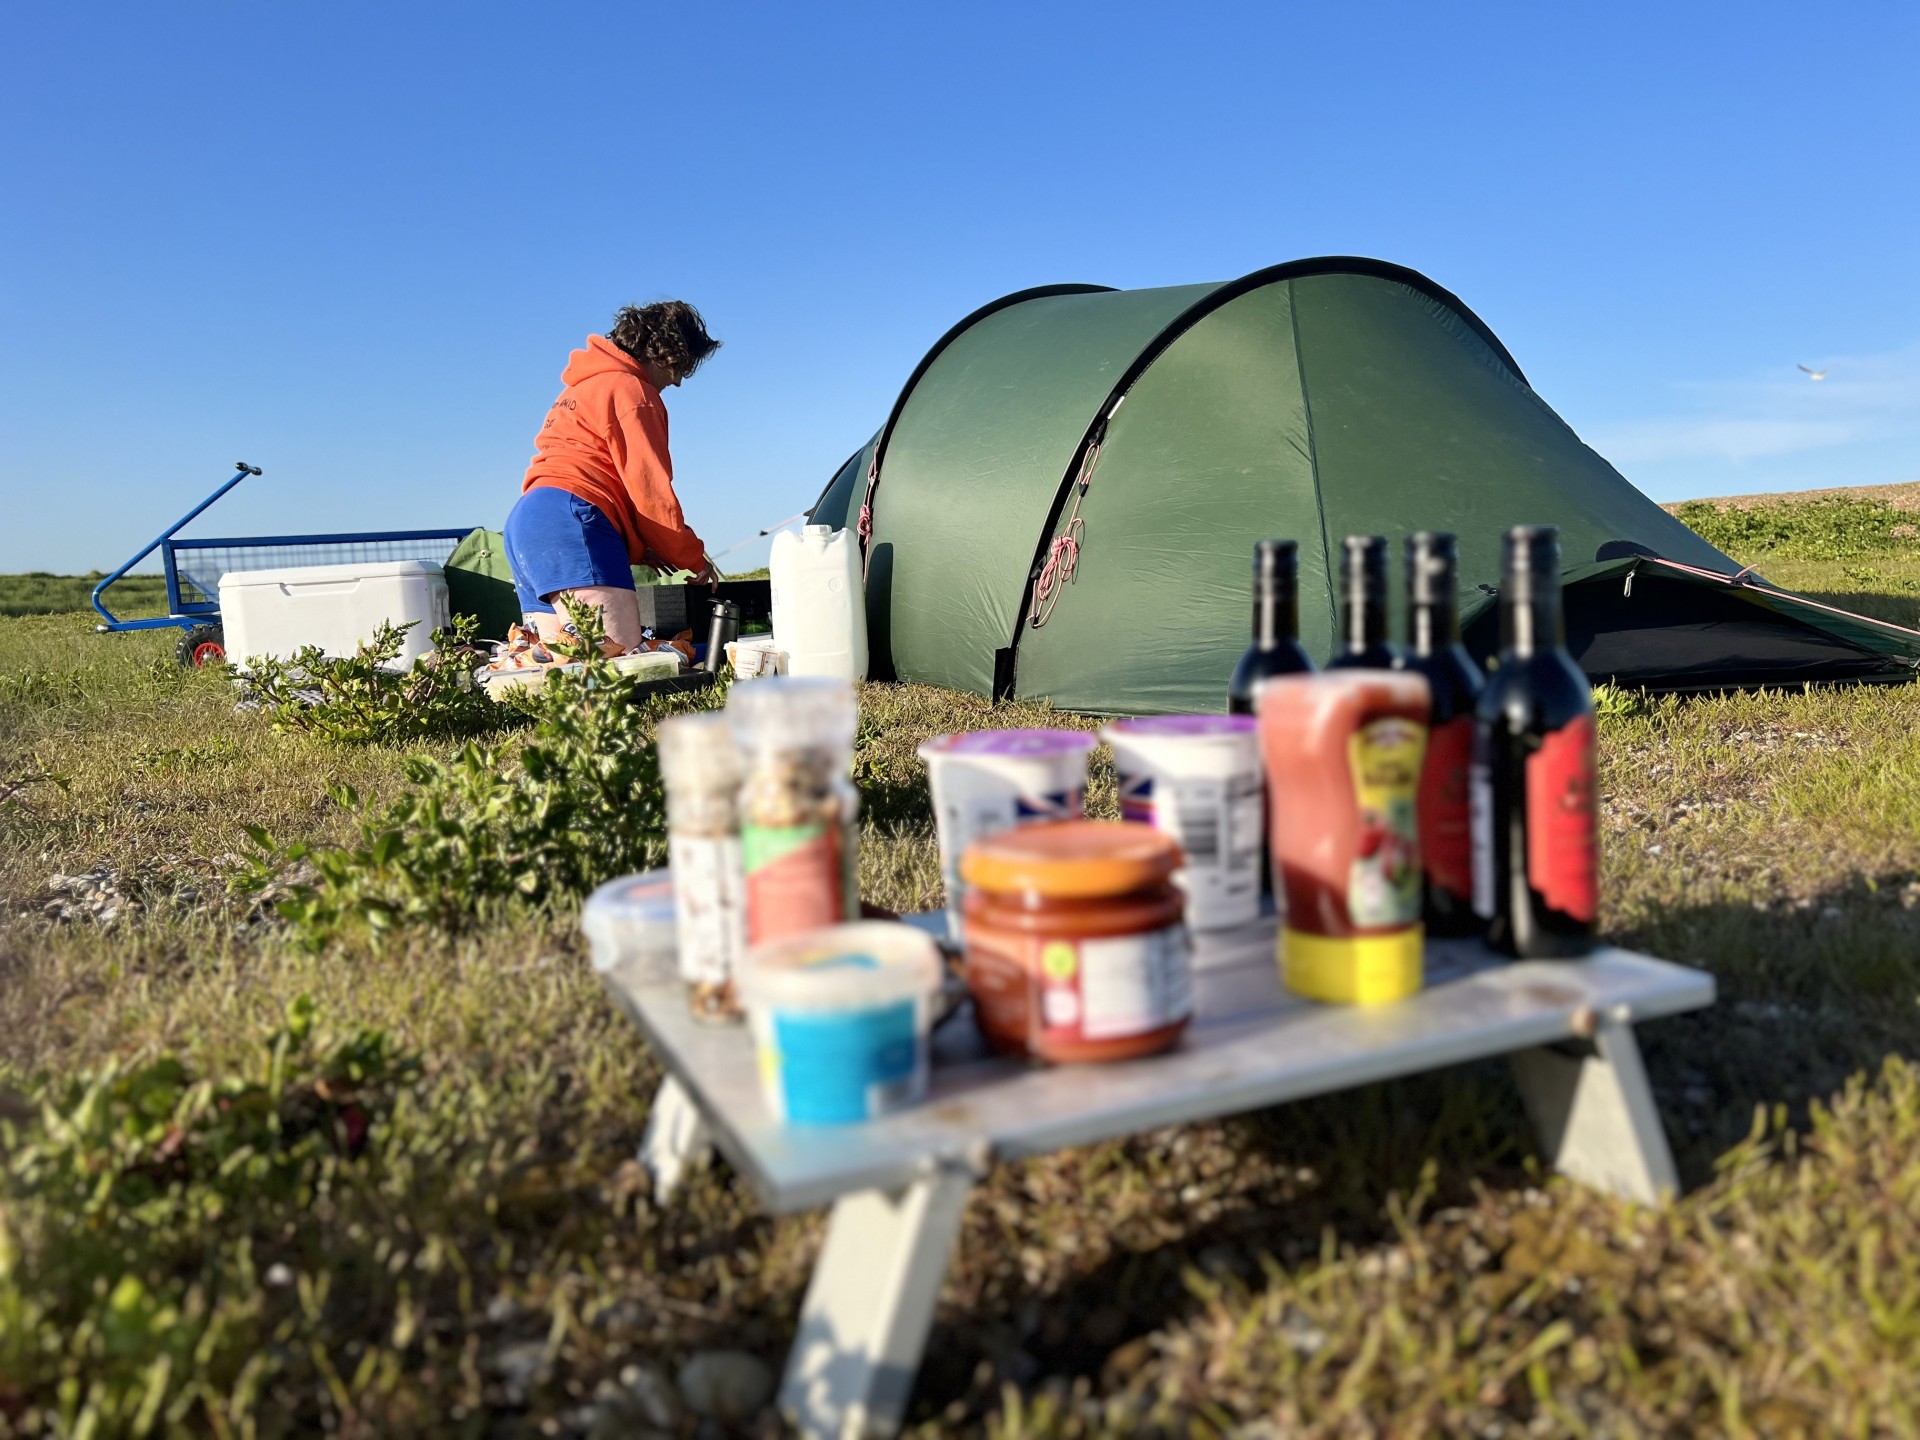 Guide wild camp with food and condiments at the ready.